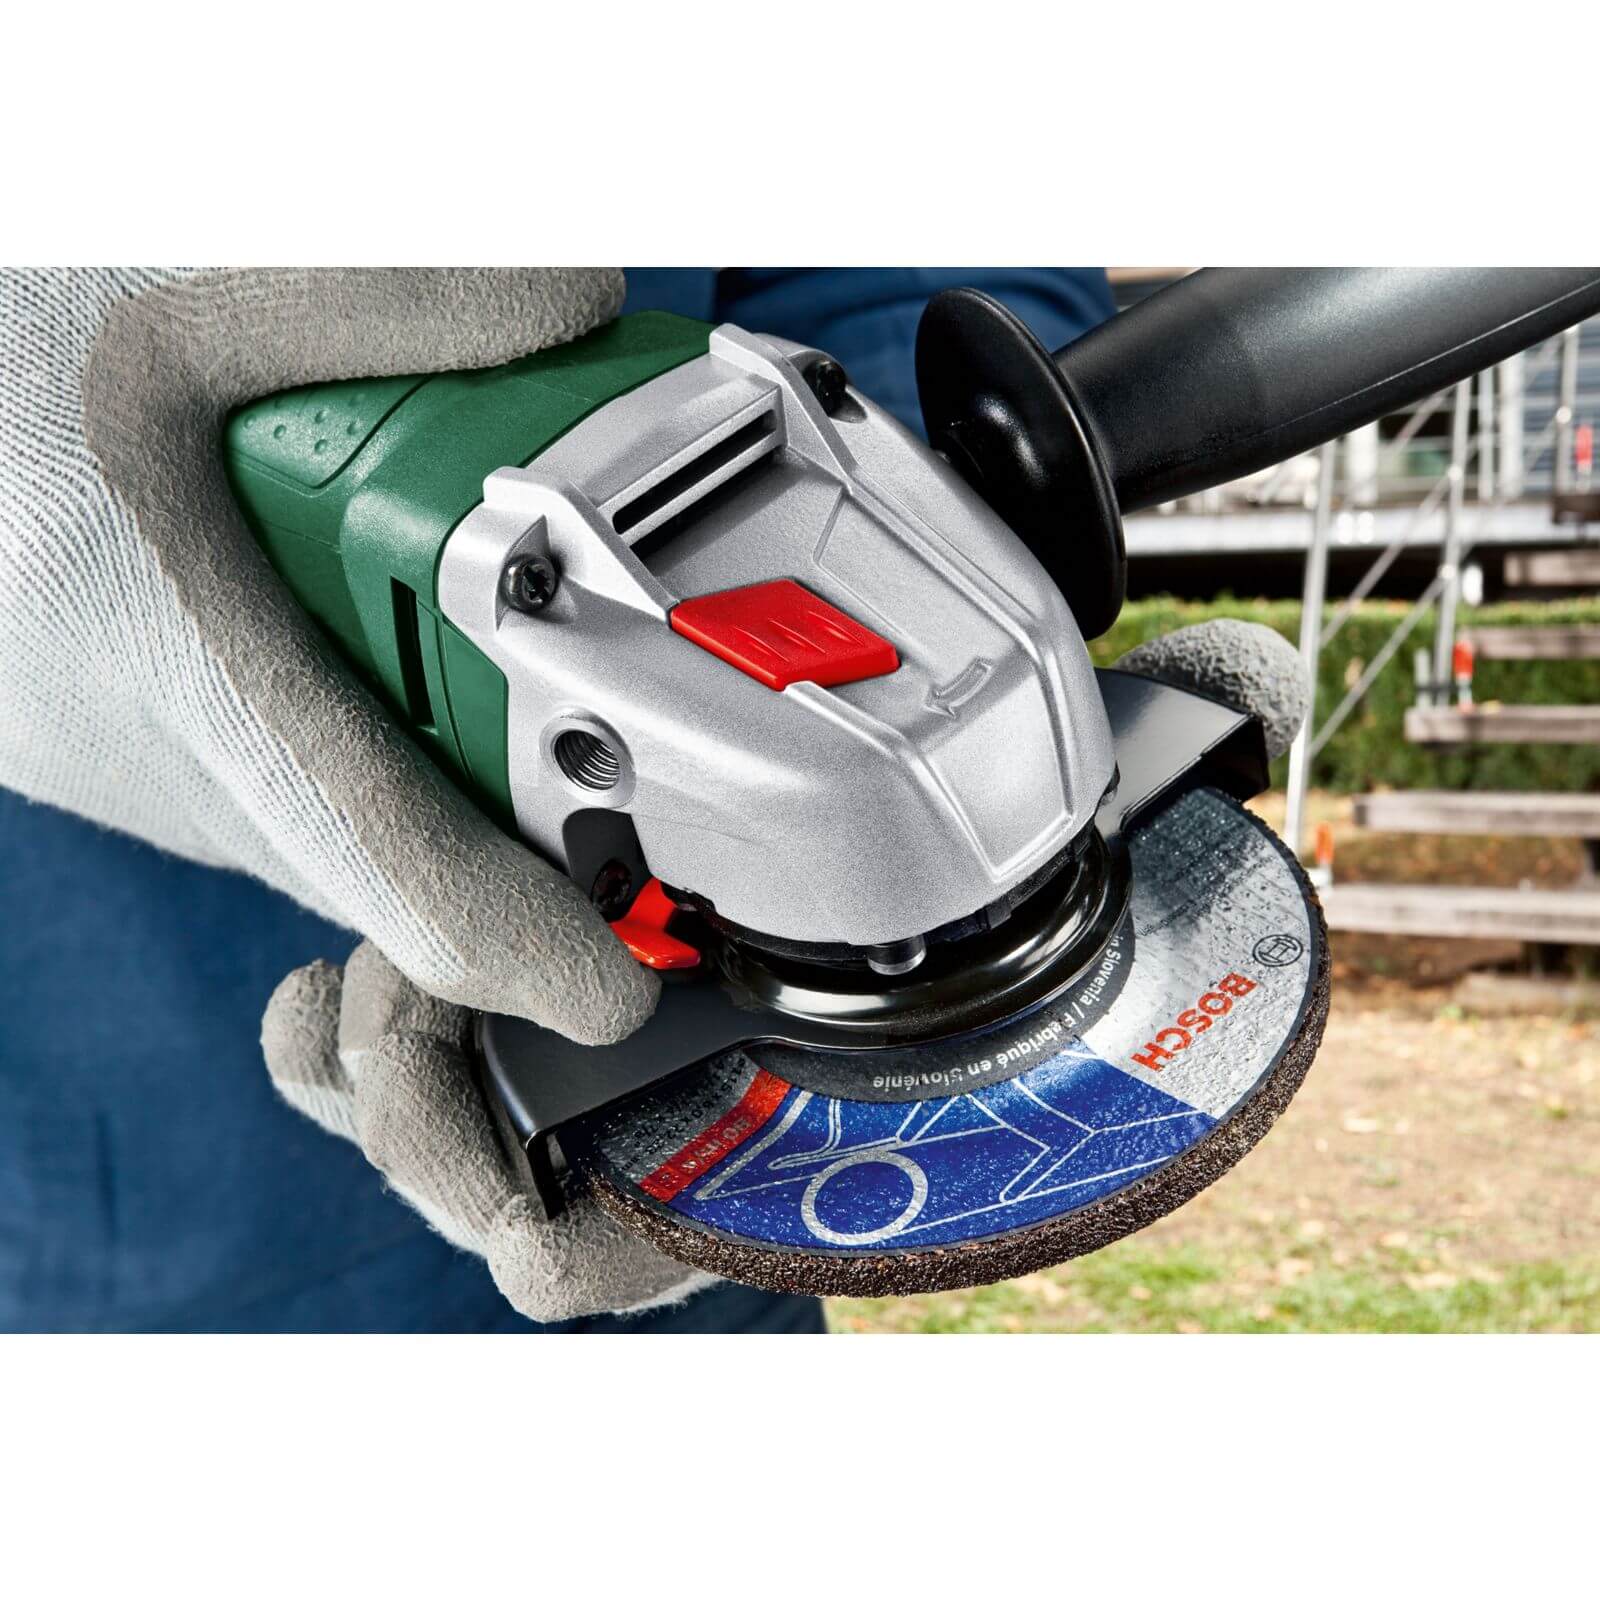 Bosch PWS 700-115 Electric 700W Angle Grinder